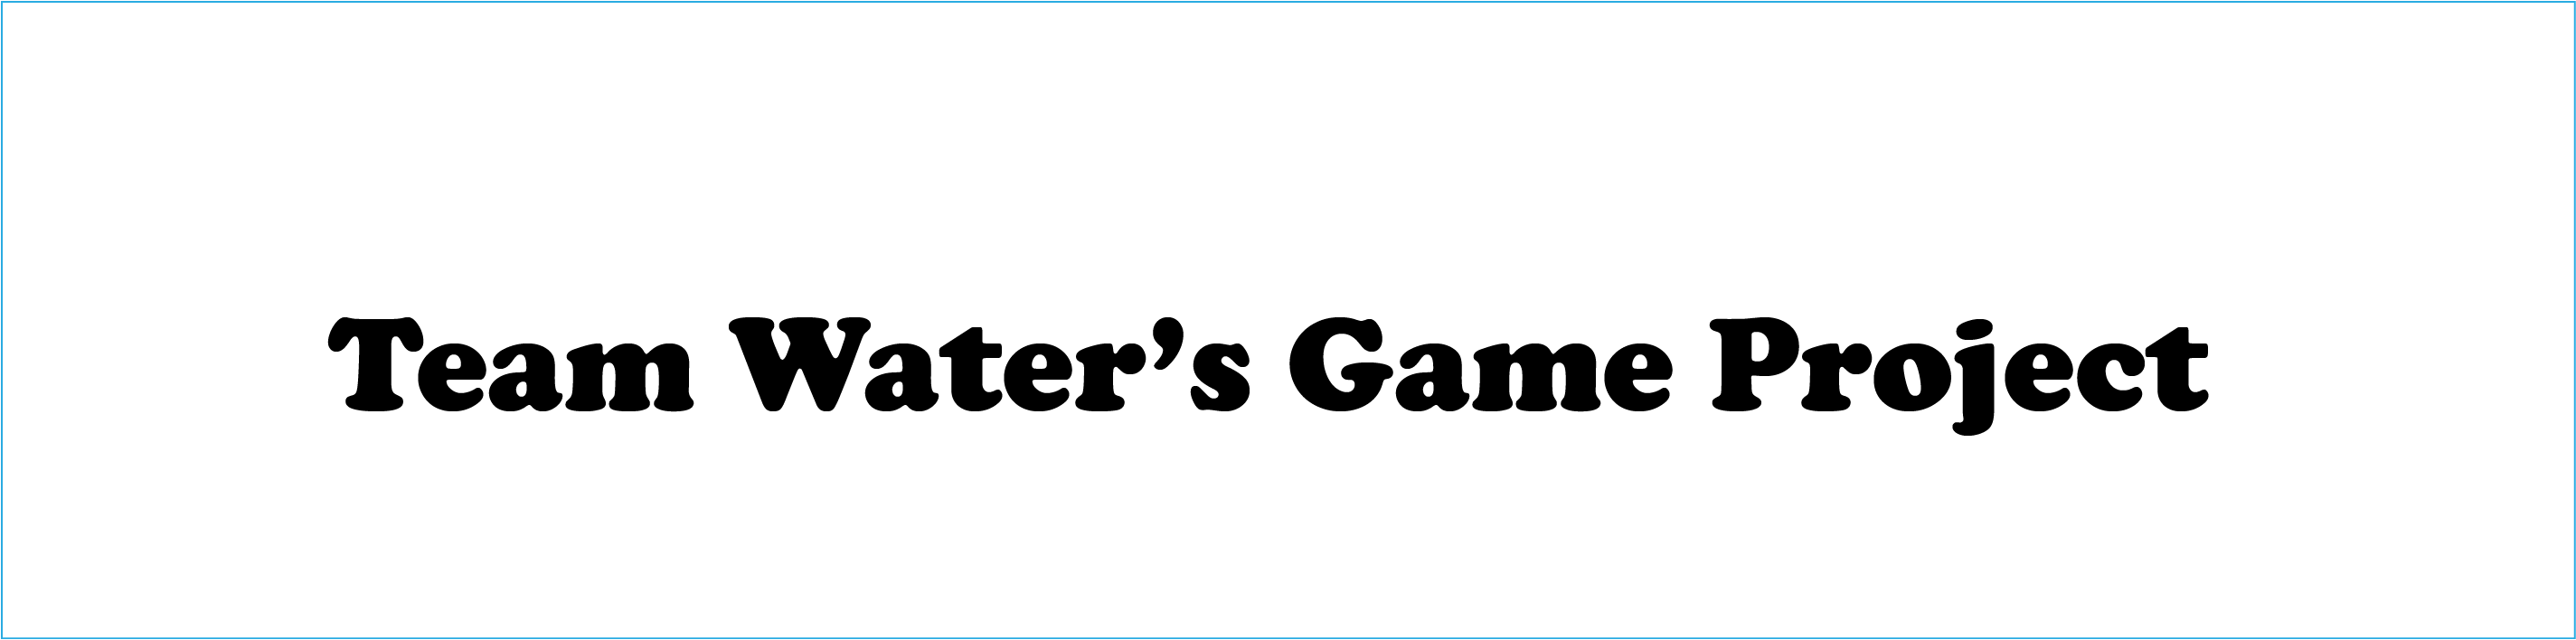 Video Game Project (Team Water)